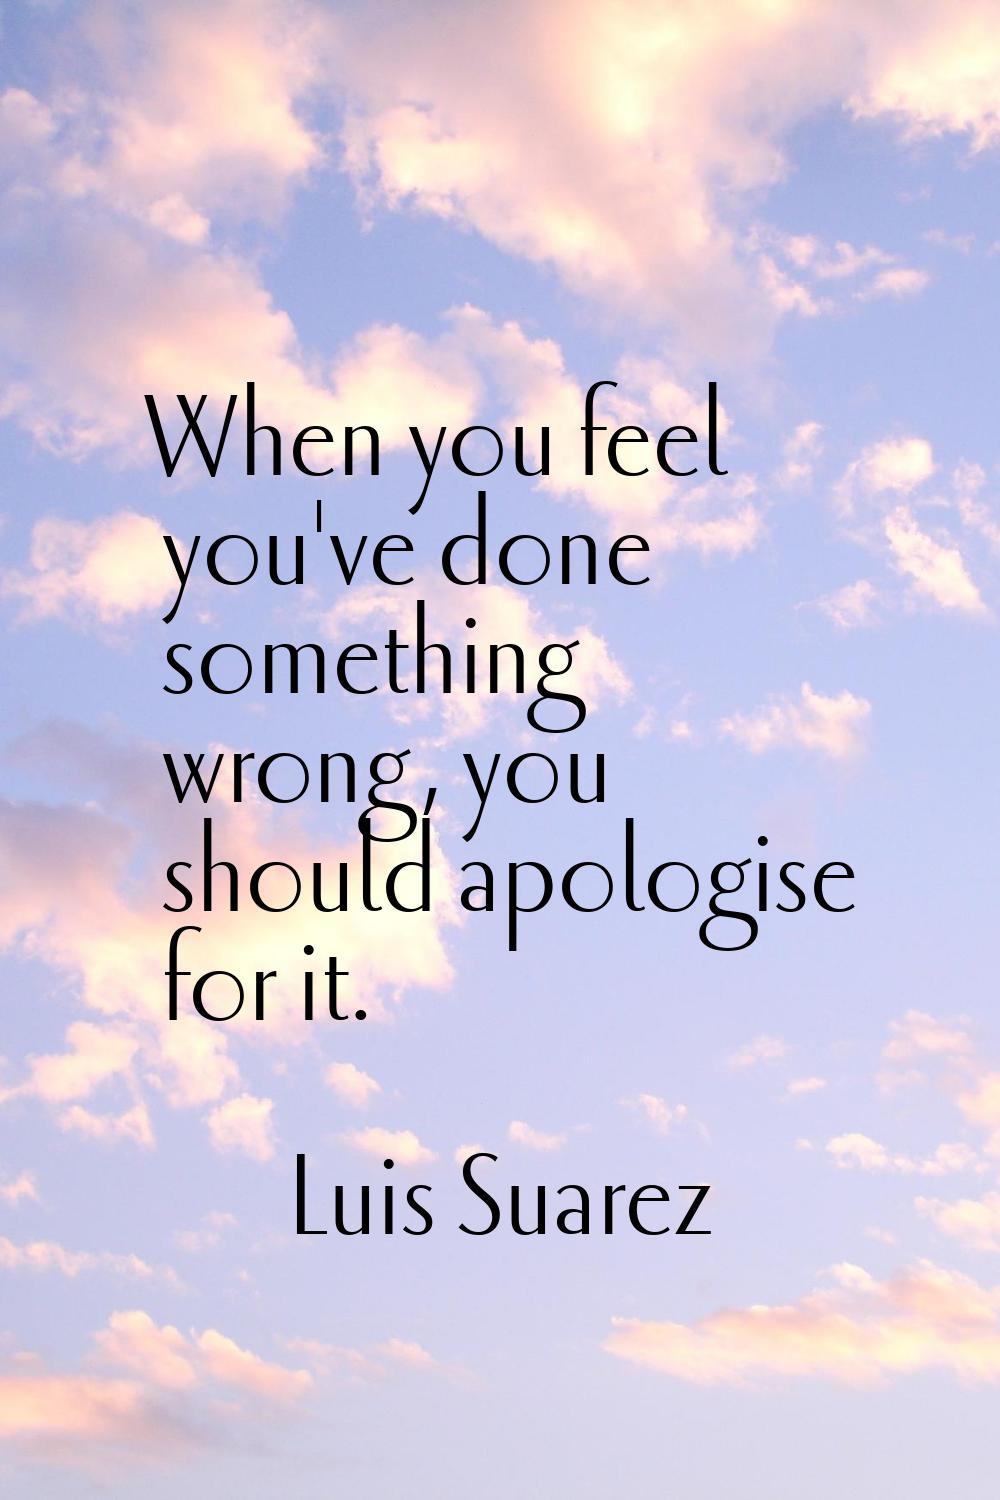 When you feel you've done something wrong, you should apologise for it.